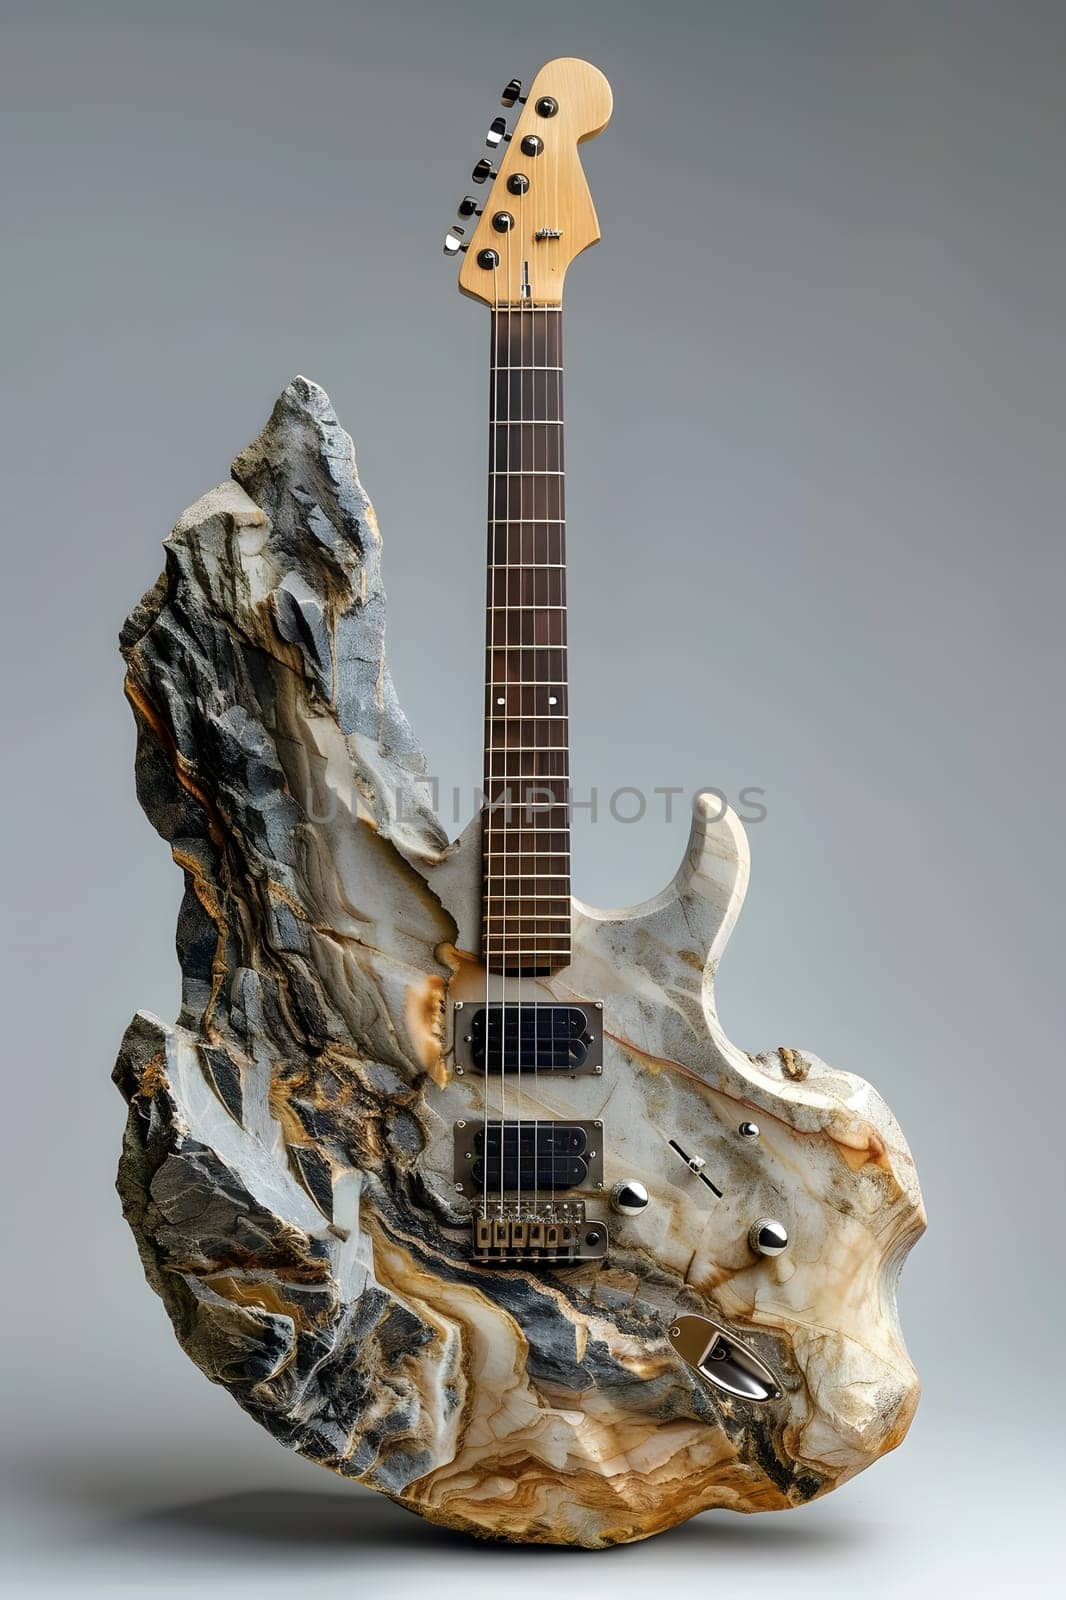 Musical instrument crafted from rock, resembling a guitar by Nadtochiy